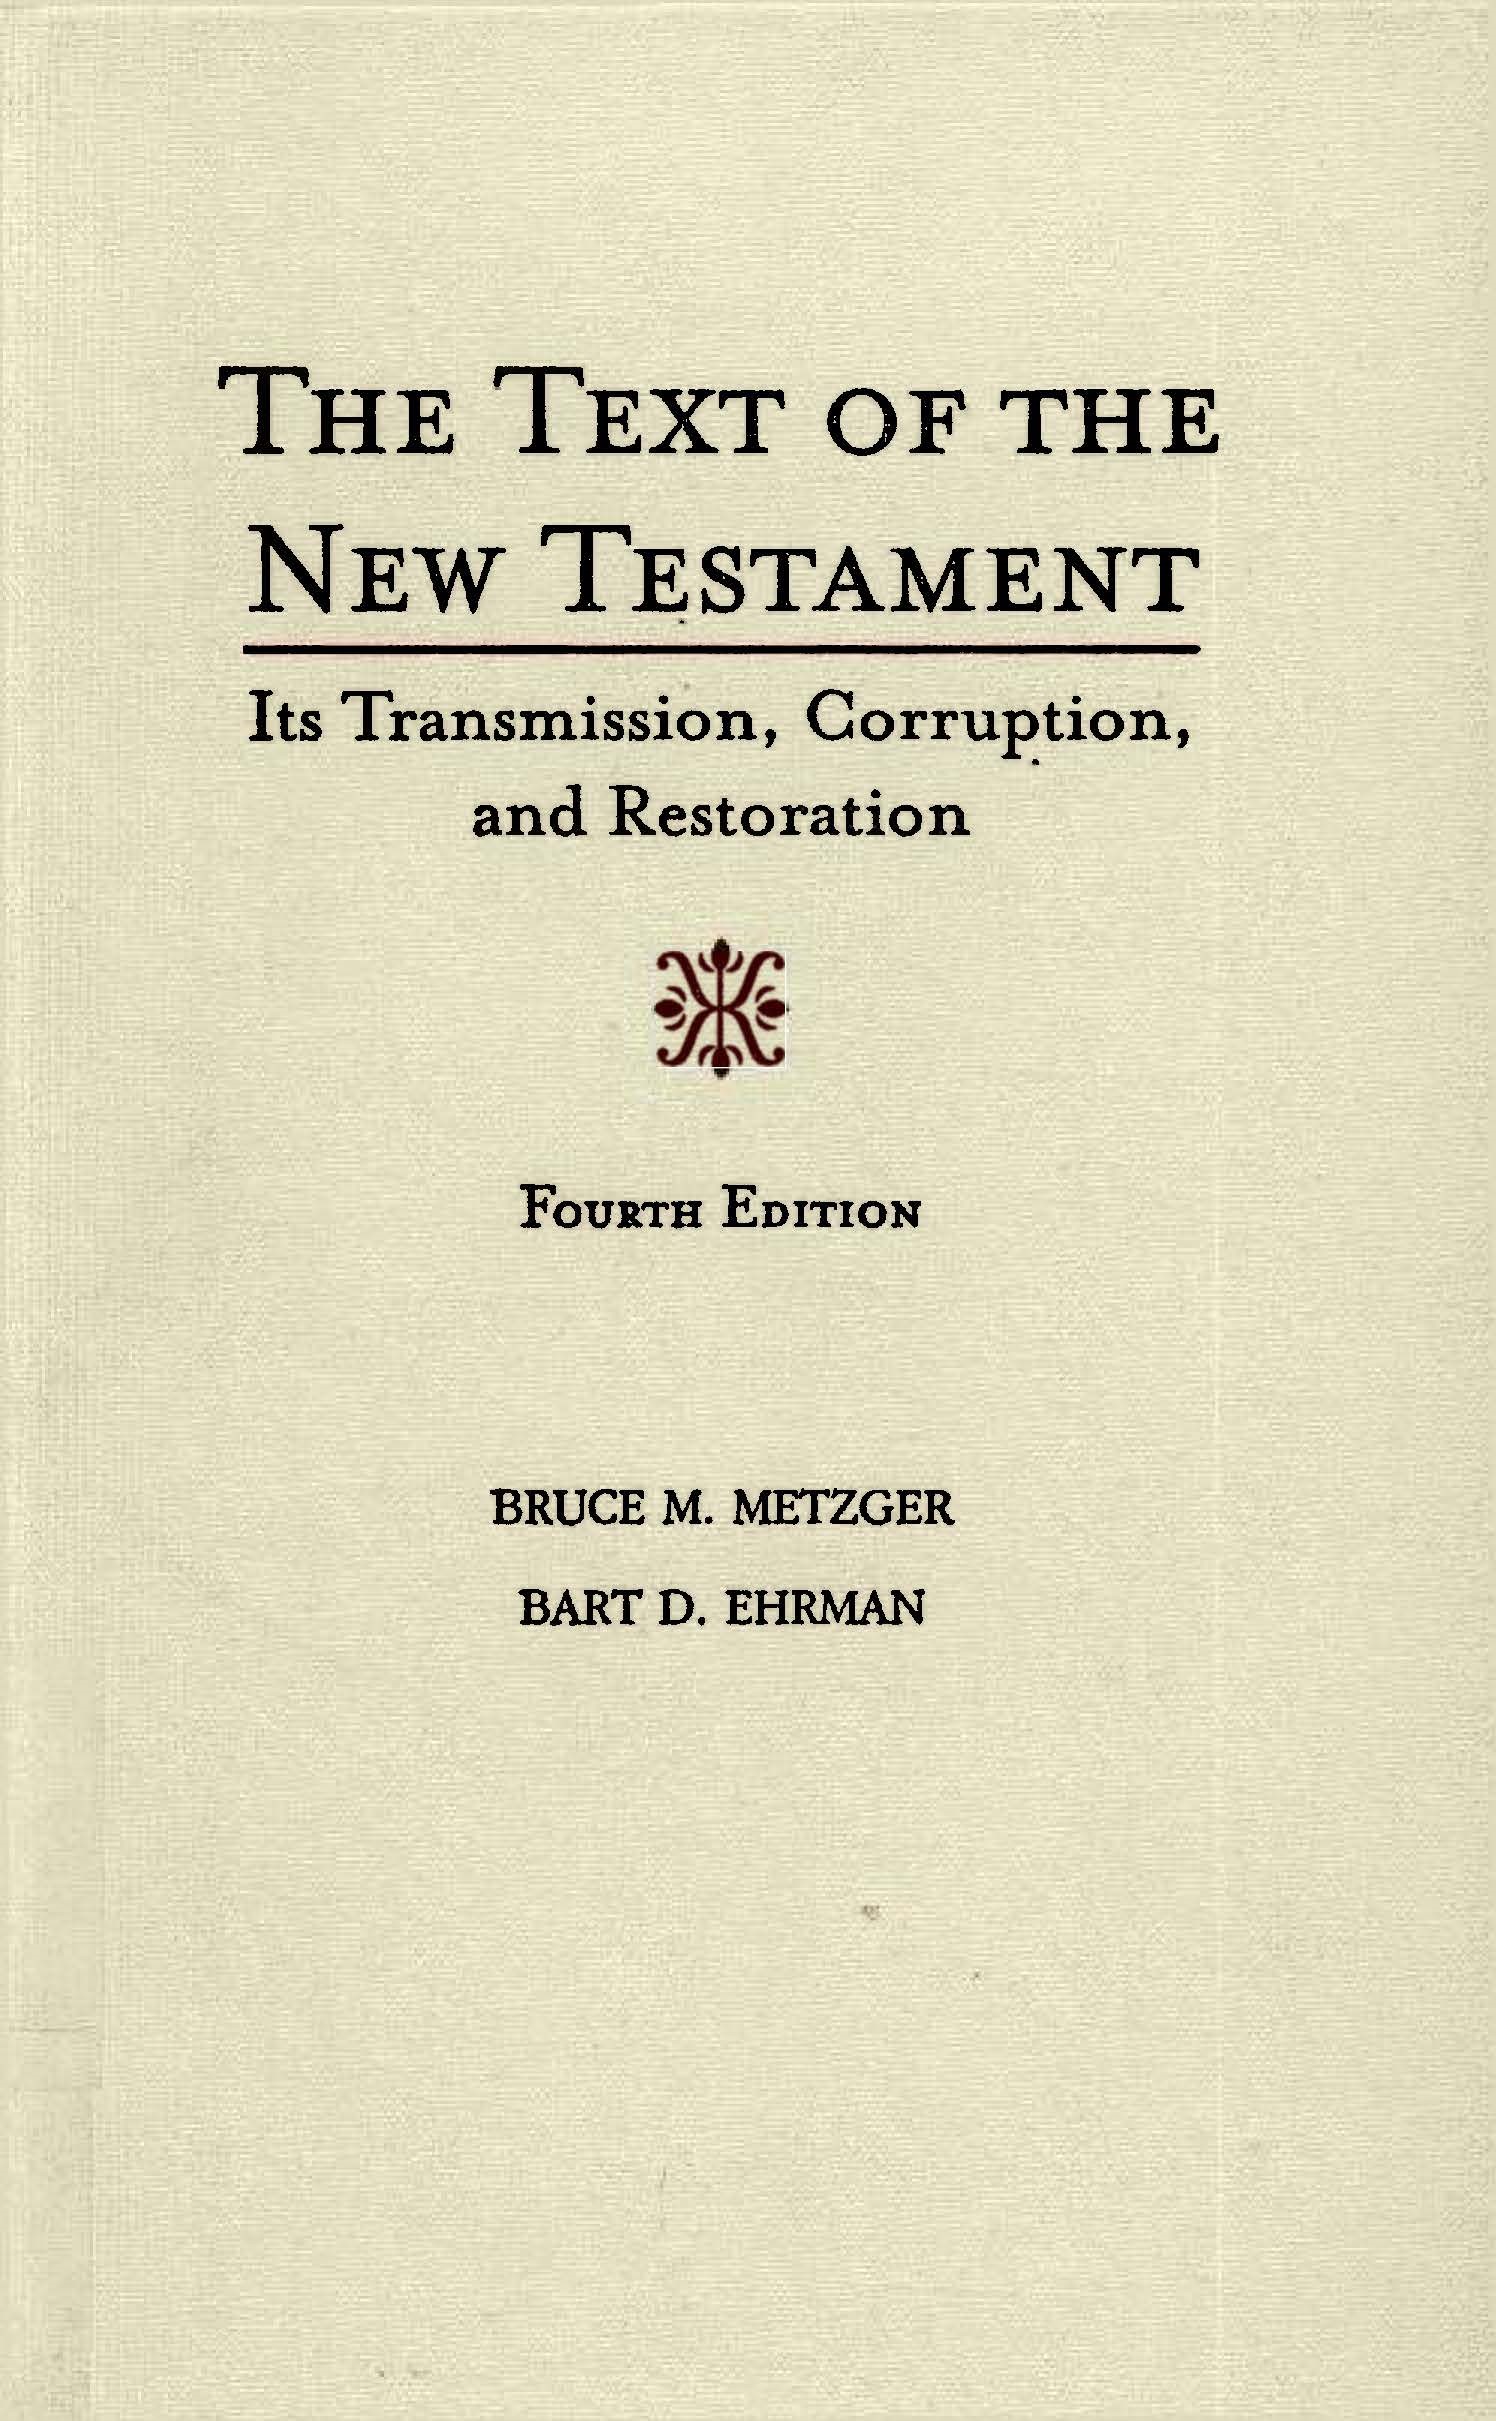 The Text of the New Testament: Its Transmission, Corruption, and Restoration 4th Edition